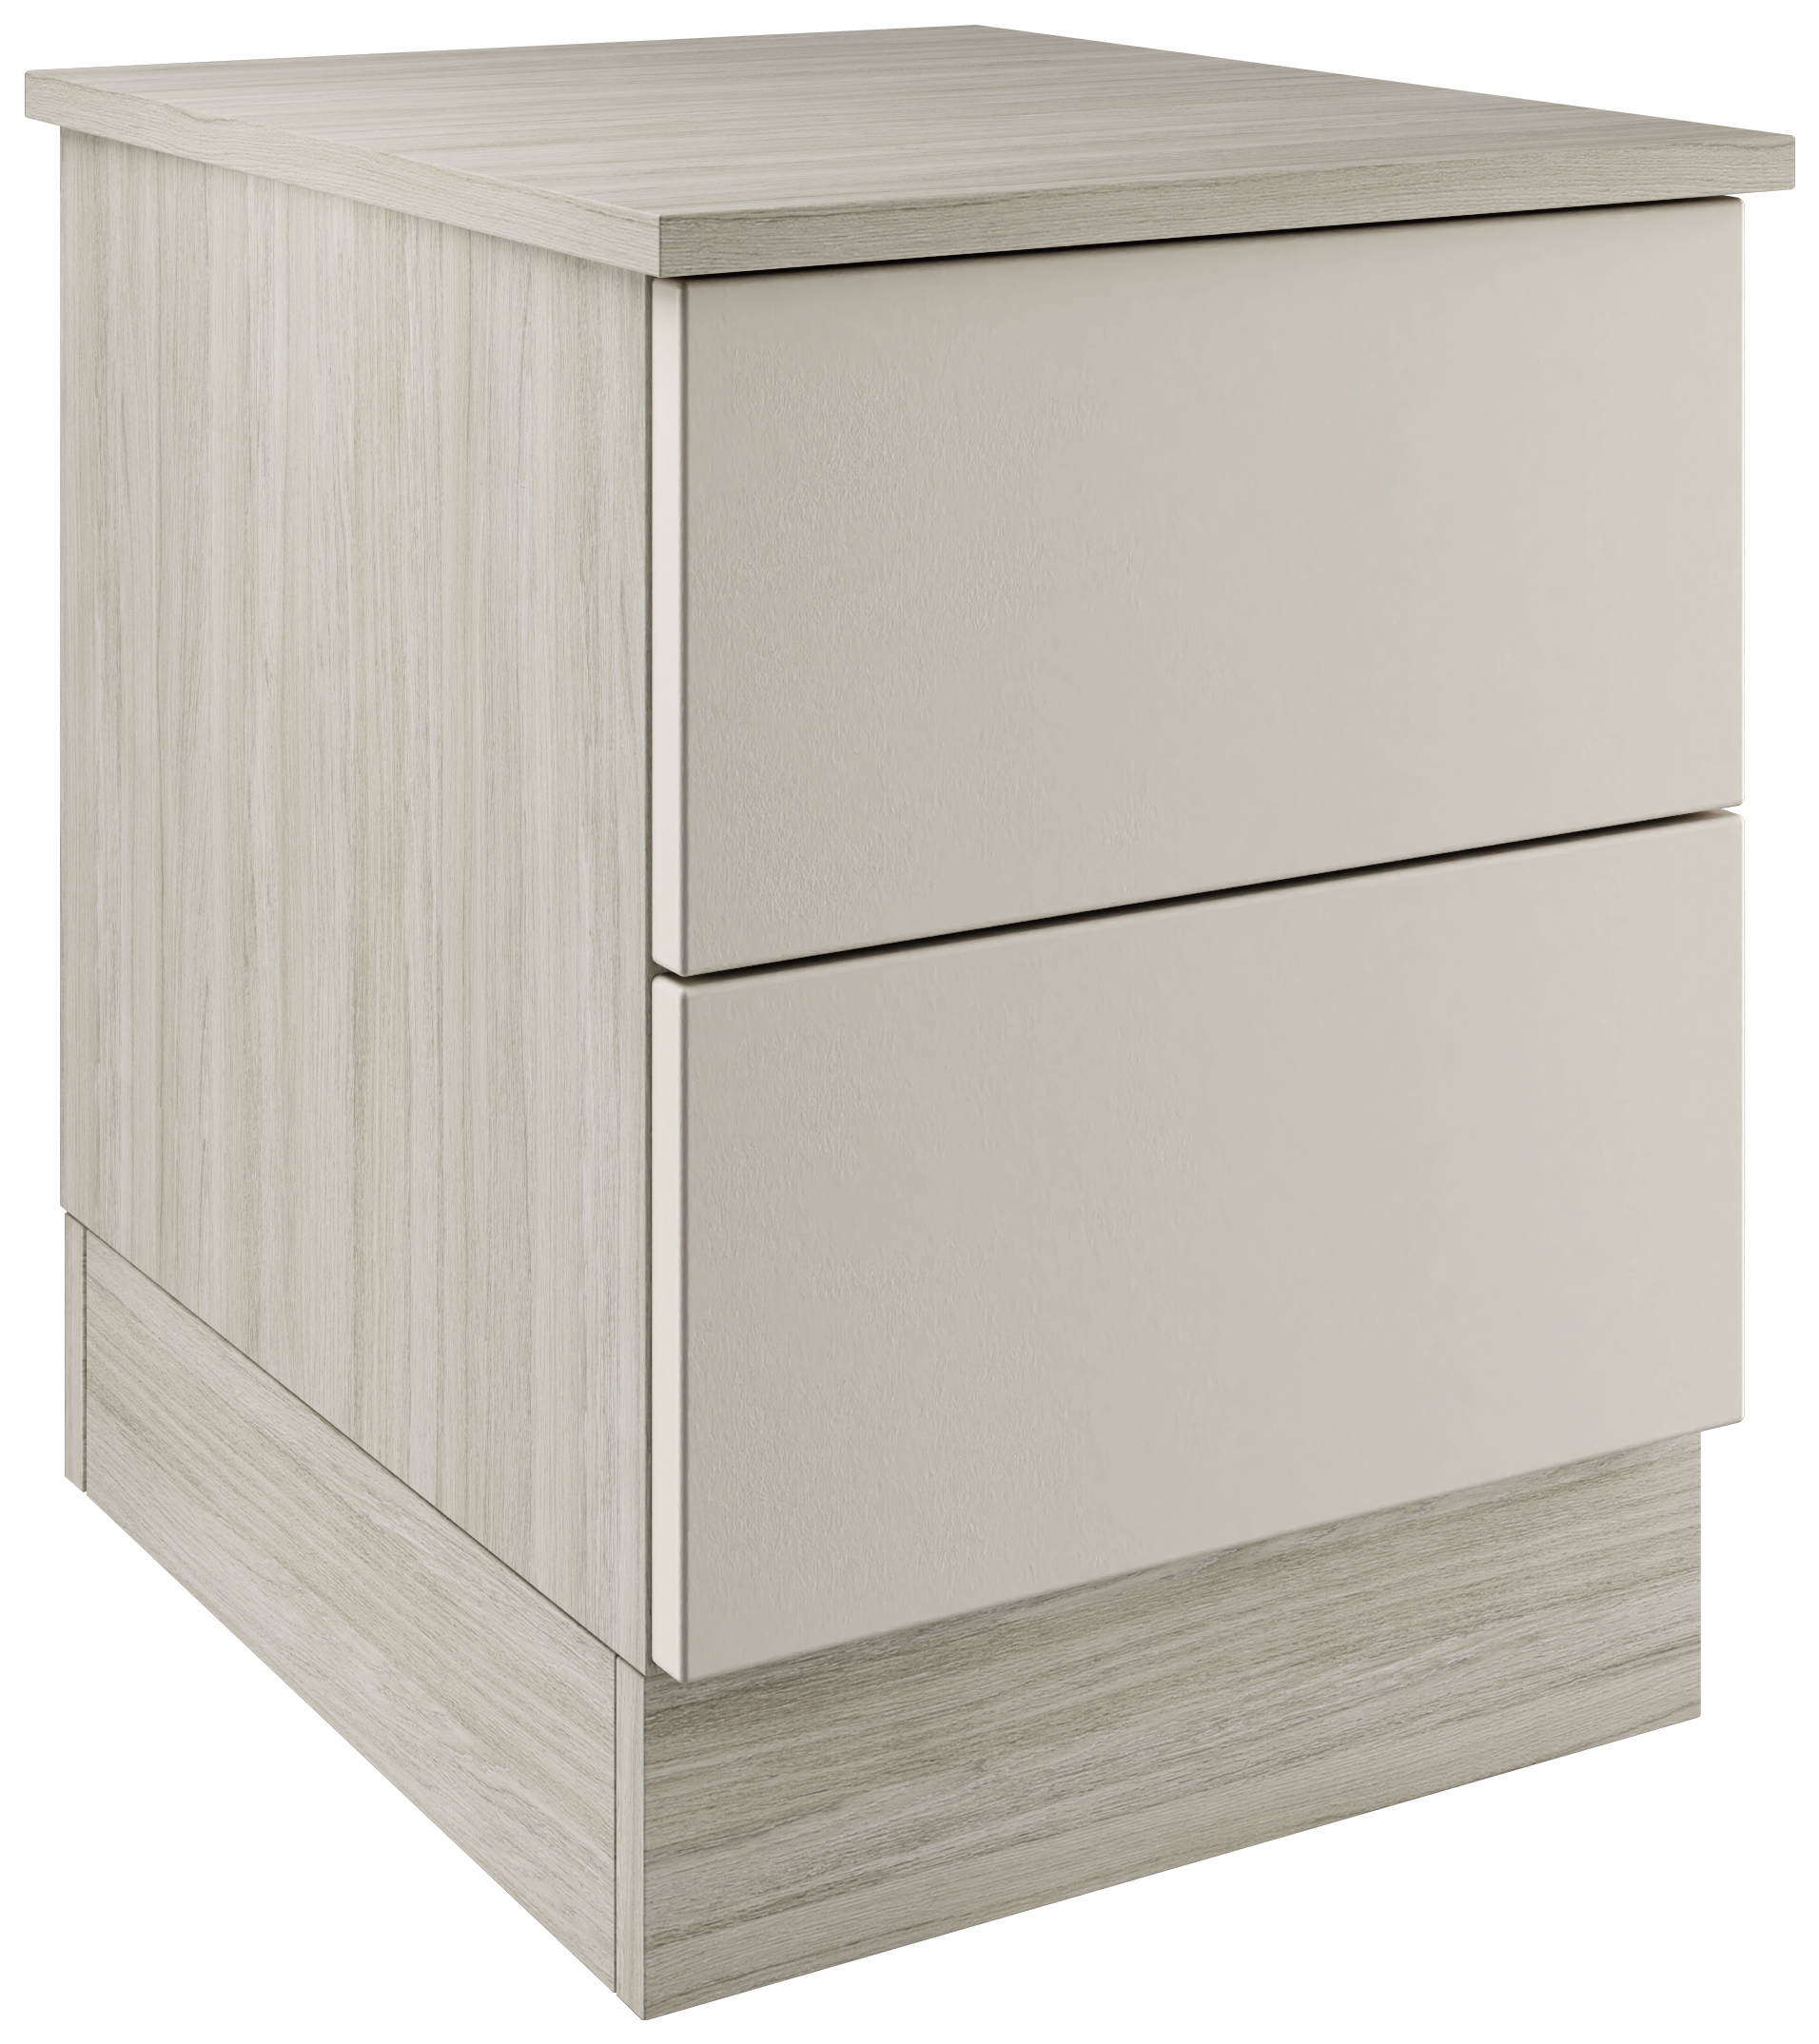 Harrogate & Bramham Taupe Grey Bedside Chest with 2 Drawers - 420 x 527 x 520mm